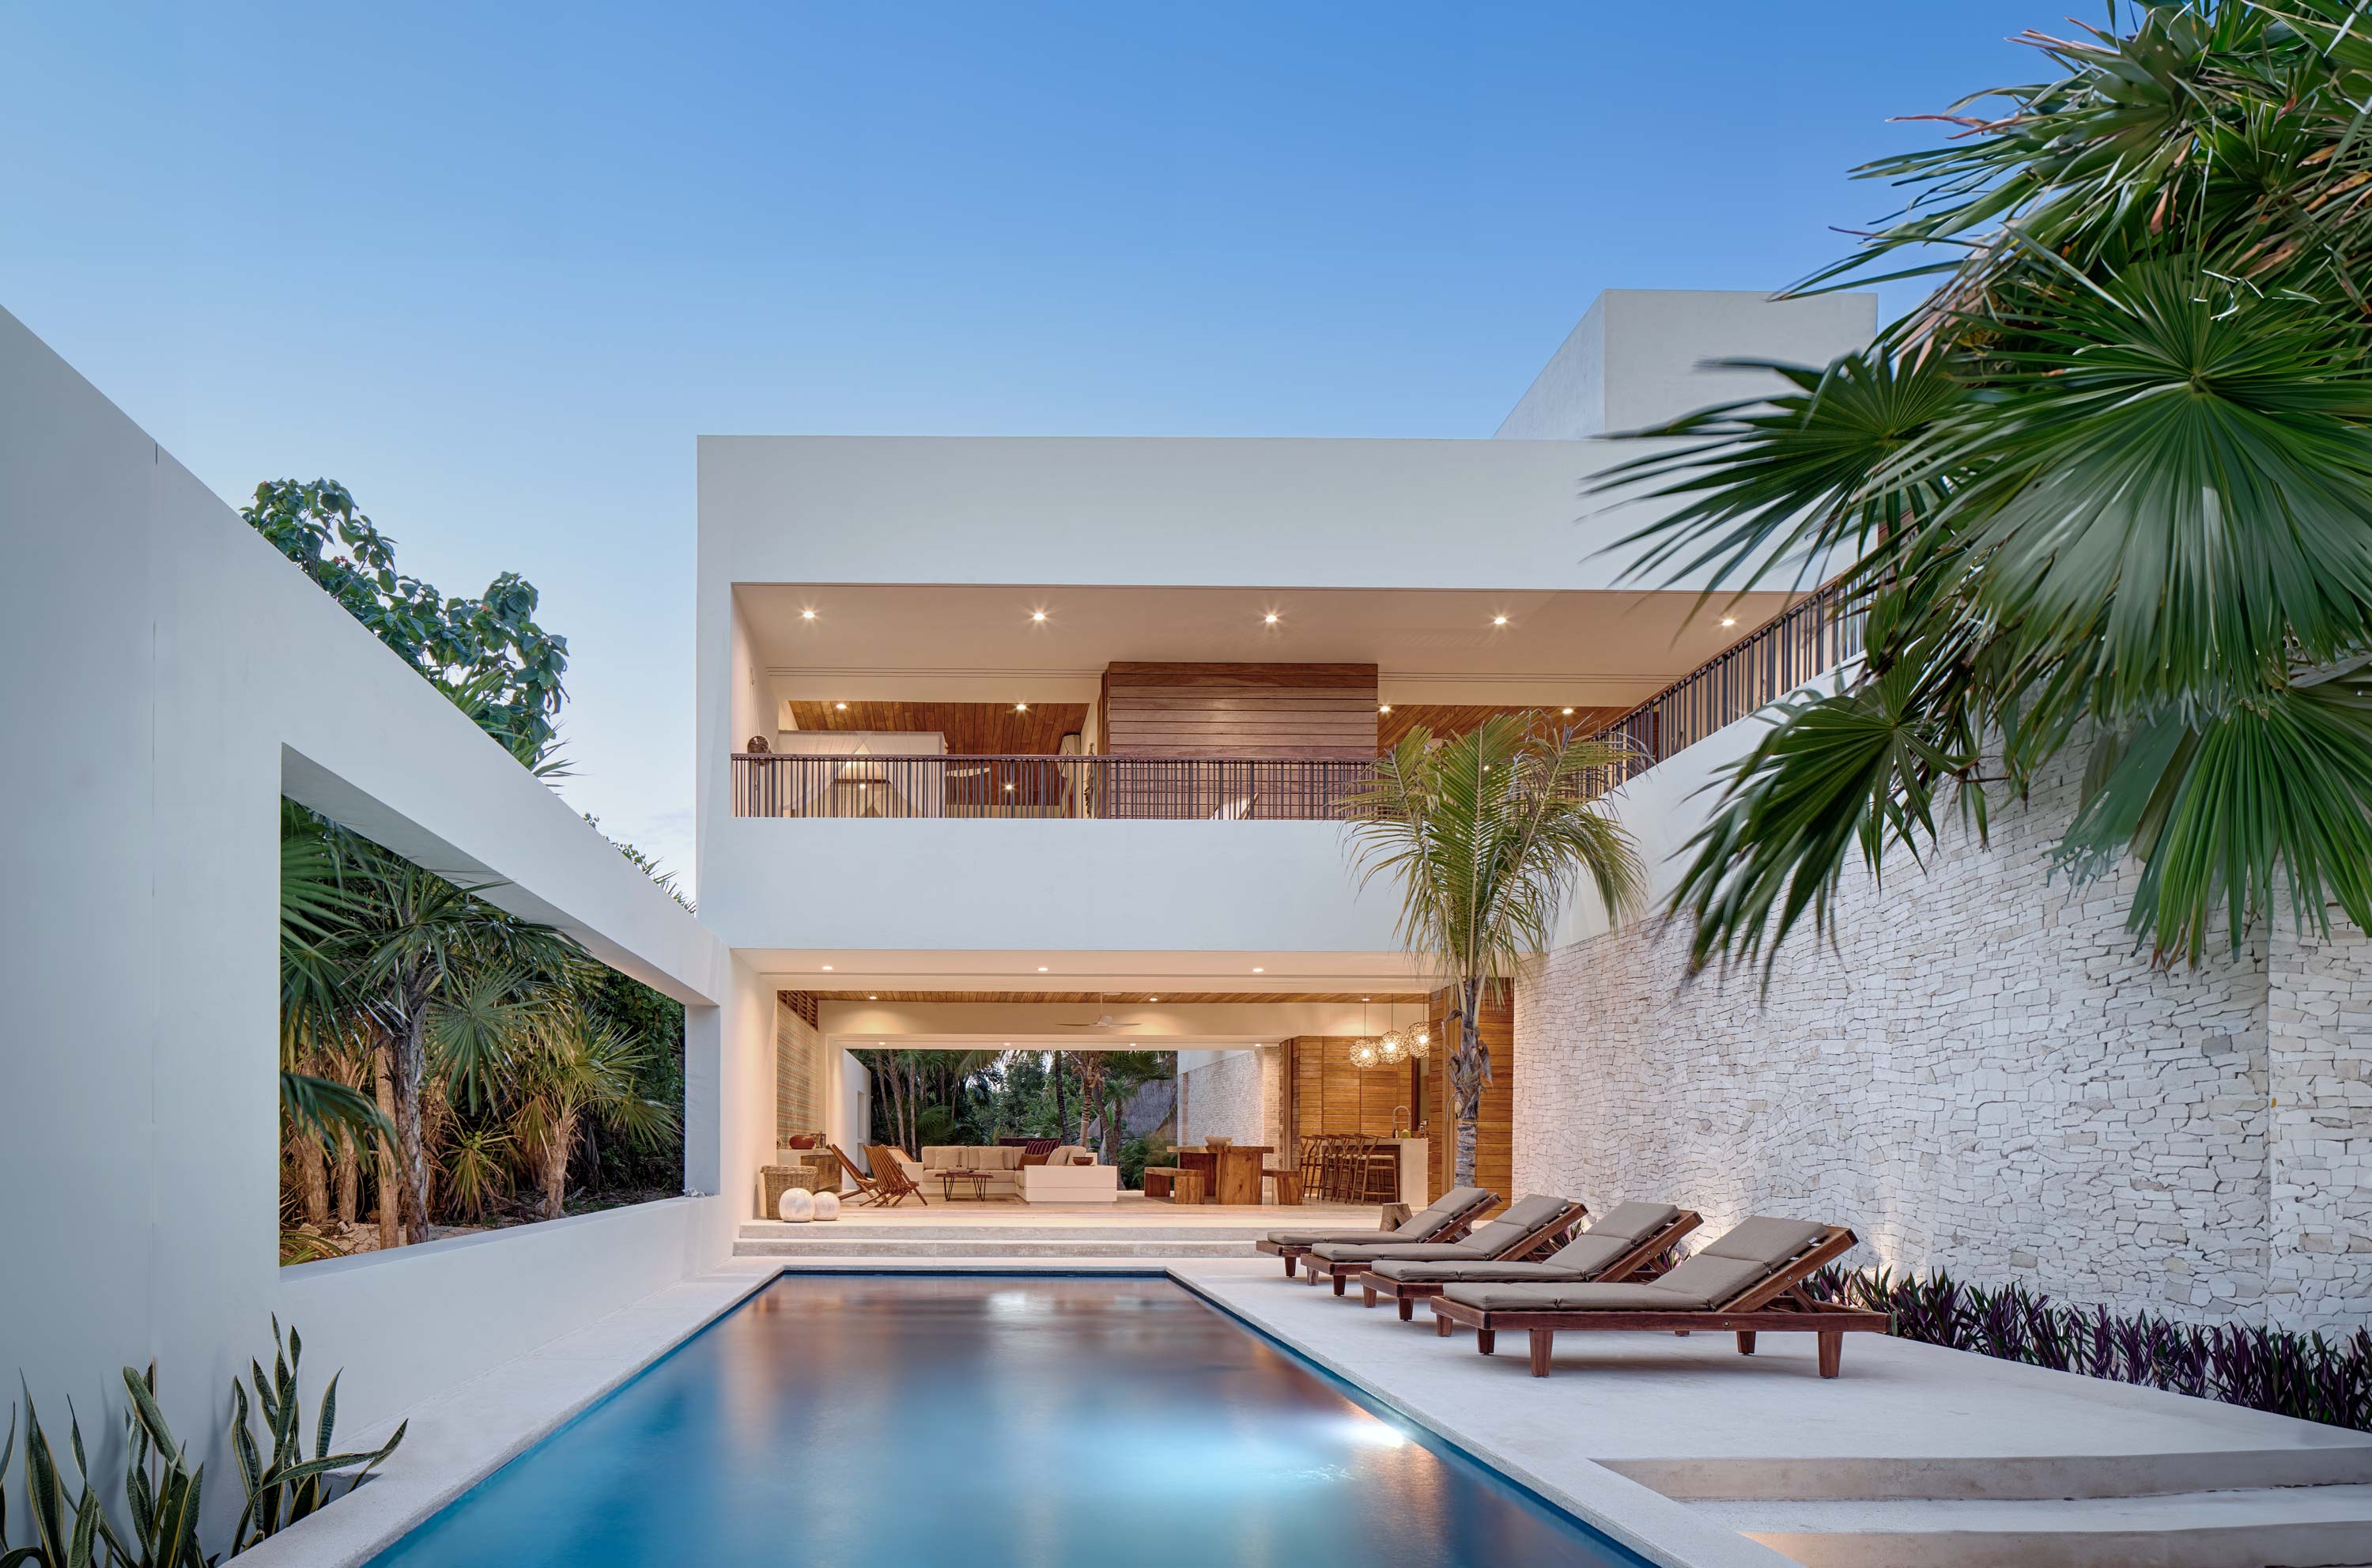 Exterior photo of Casa Xixim by Specht Novak Architects. Shot by Taggart Sorensen, featuring the pool, lounging area, and views of the interior and upper level of the property framed by palm trees.